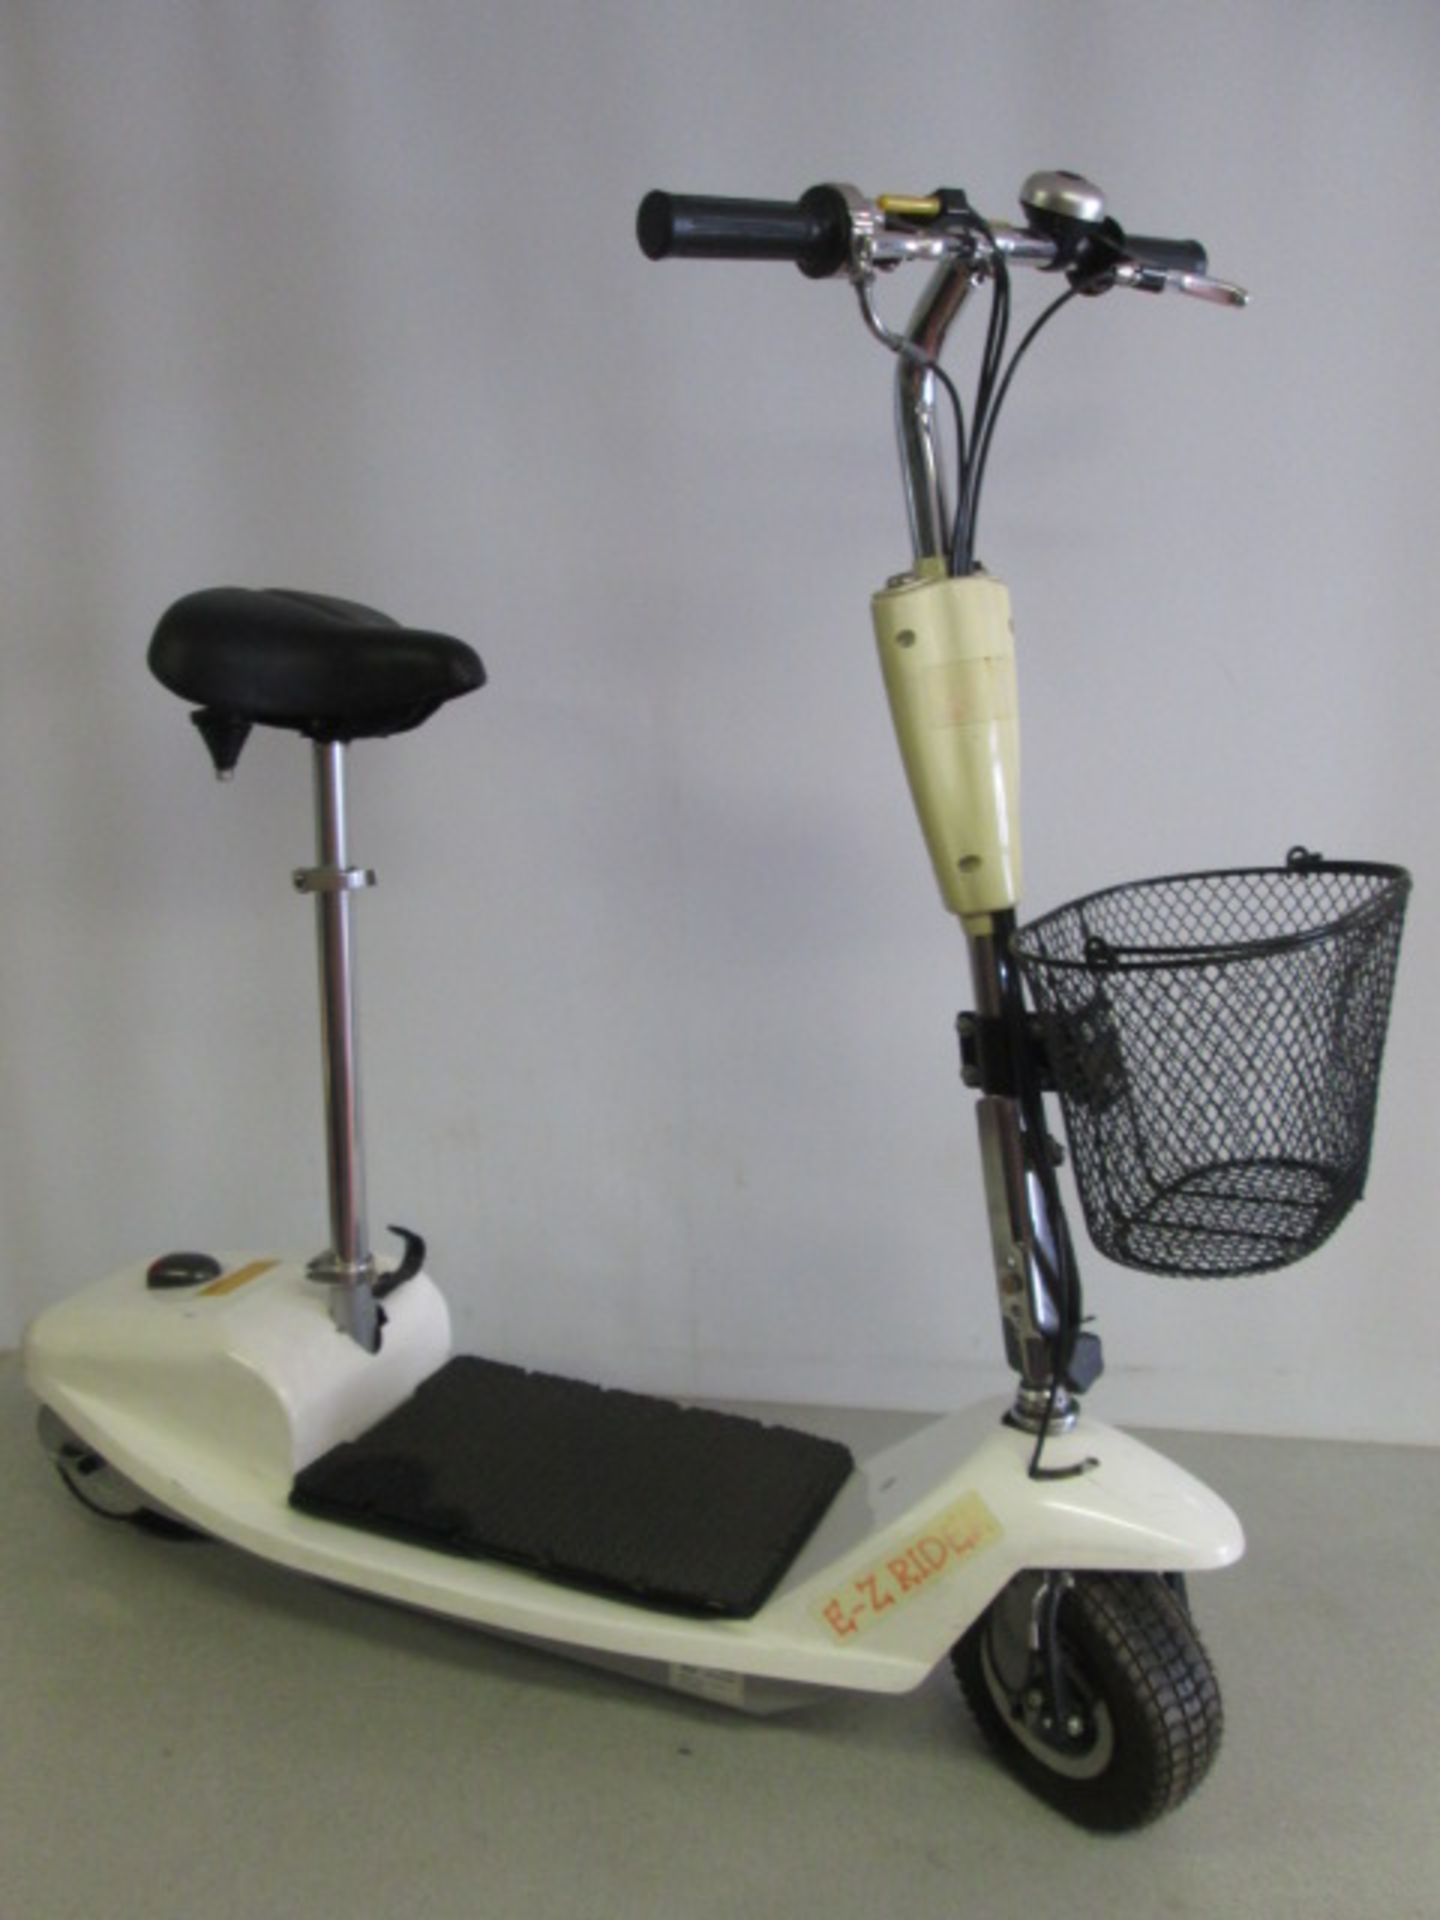 E Z Rider Electric 2 Wheel Mini Scooter. Comes with Battery Charger which Requires Adapter &